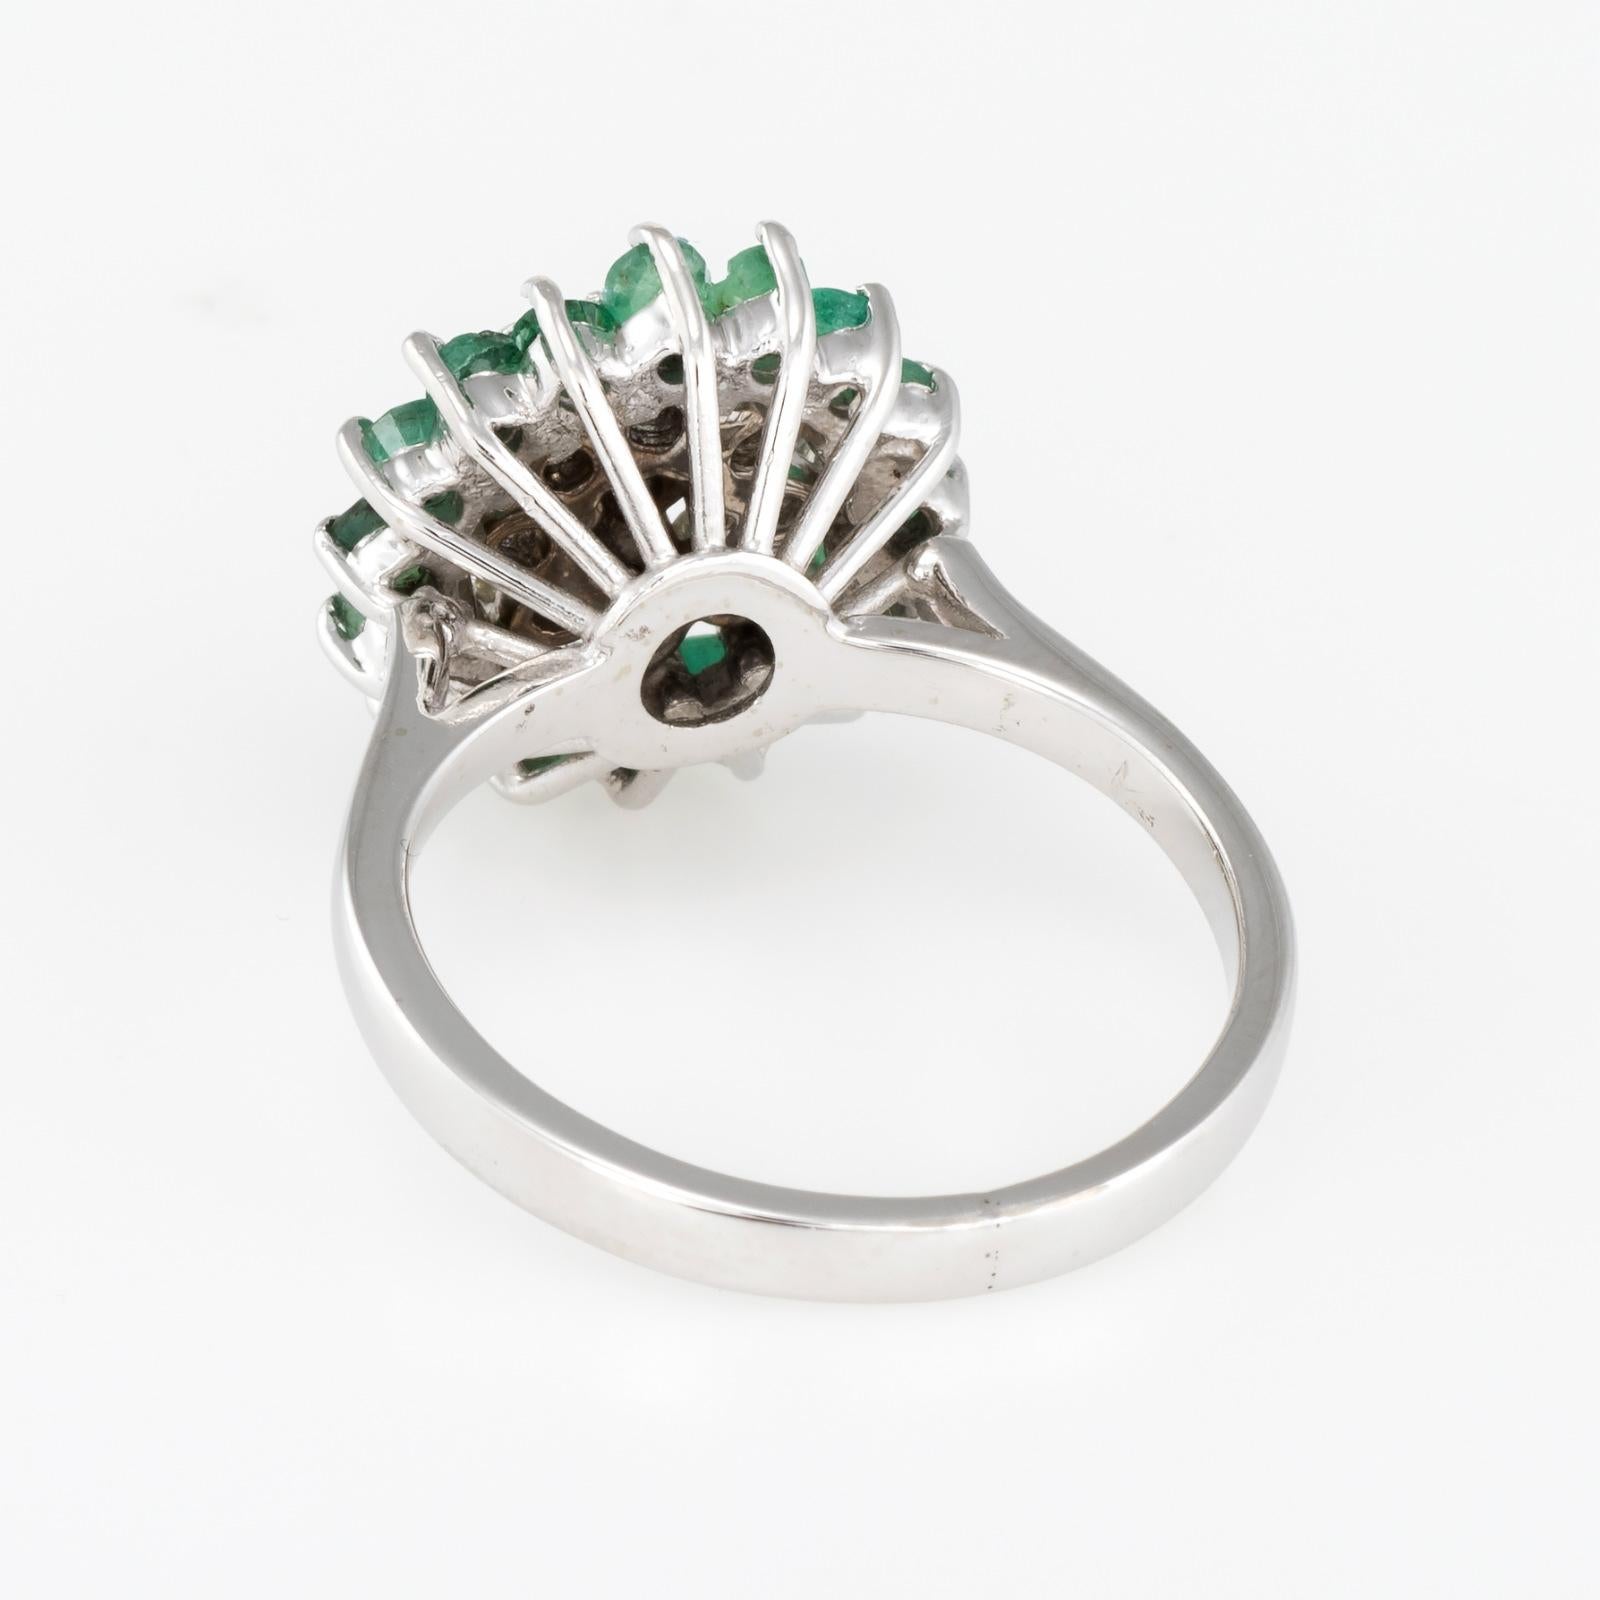 Emerald Diamond Cluster Ring Vintage 14k White Gold Estate Fine Jewelry In Good Condition For Sale In Torrance, CA